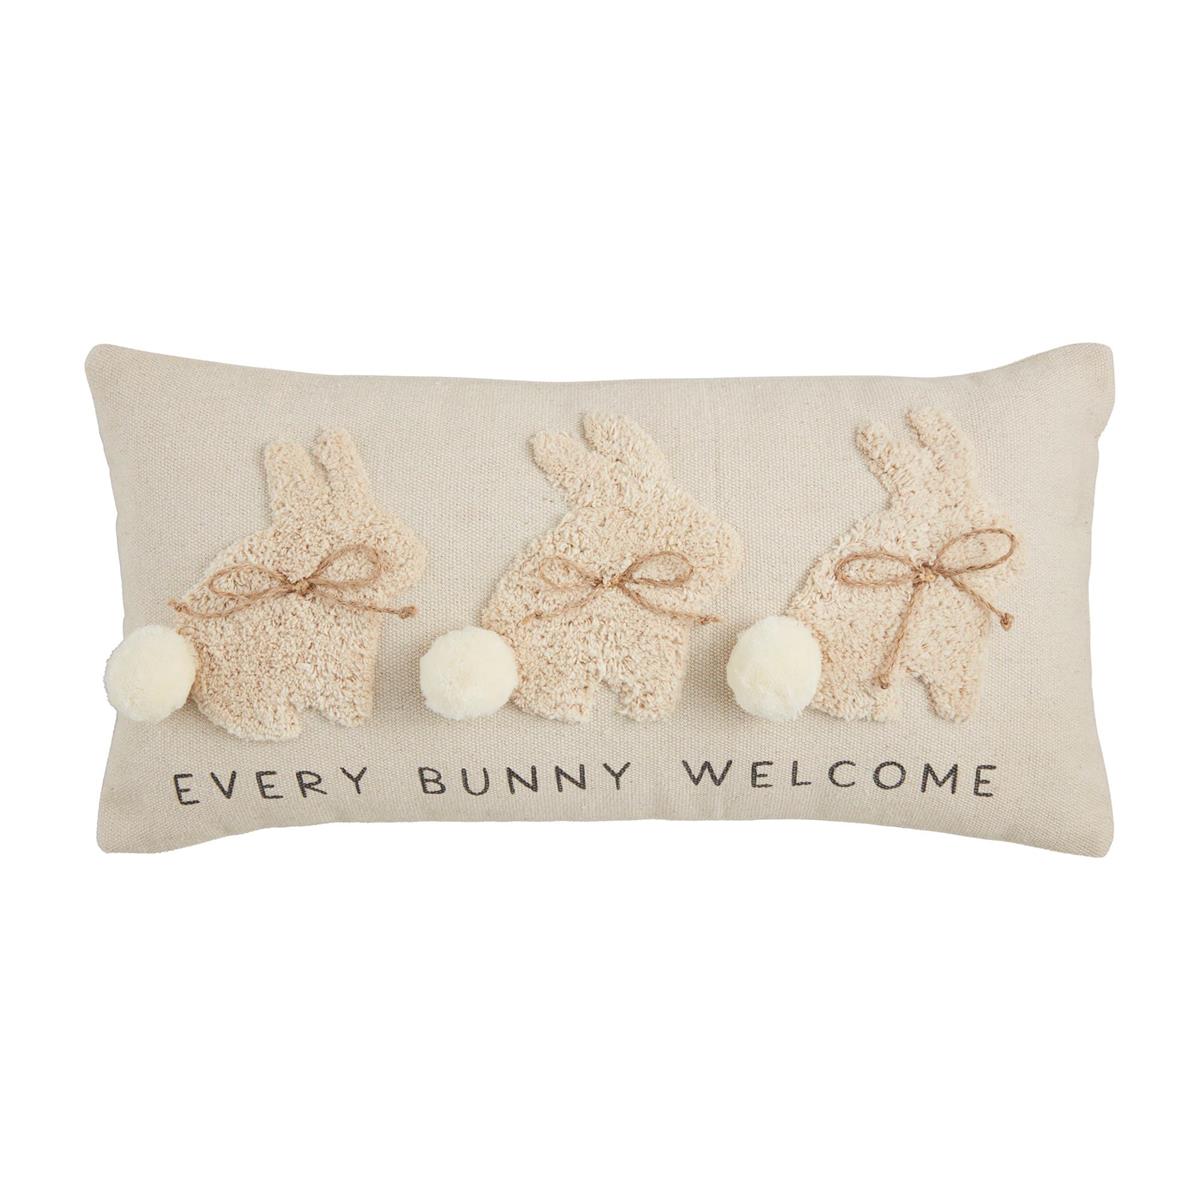 Photo of our linen colored cotton pillow with saying "Every Bunny Welcome" and has tufted applique bunnies. Zipper closure.